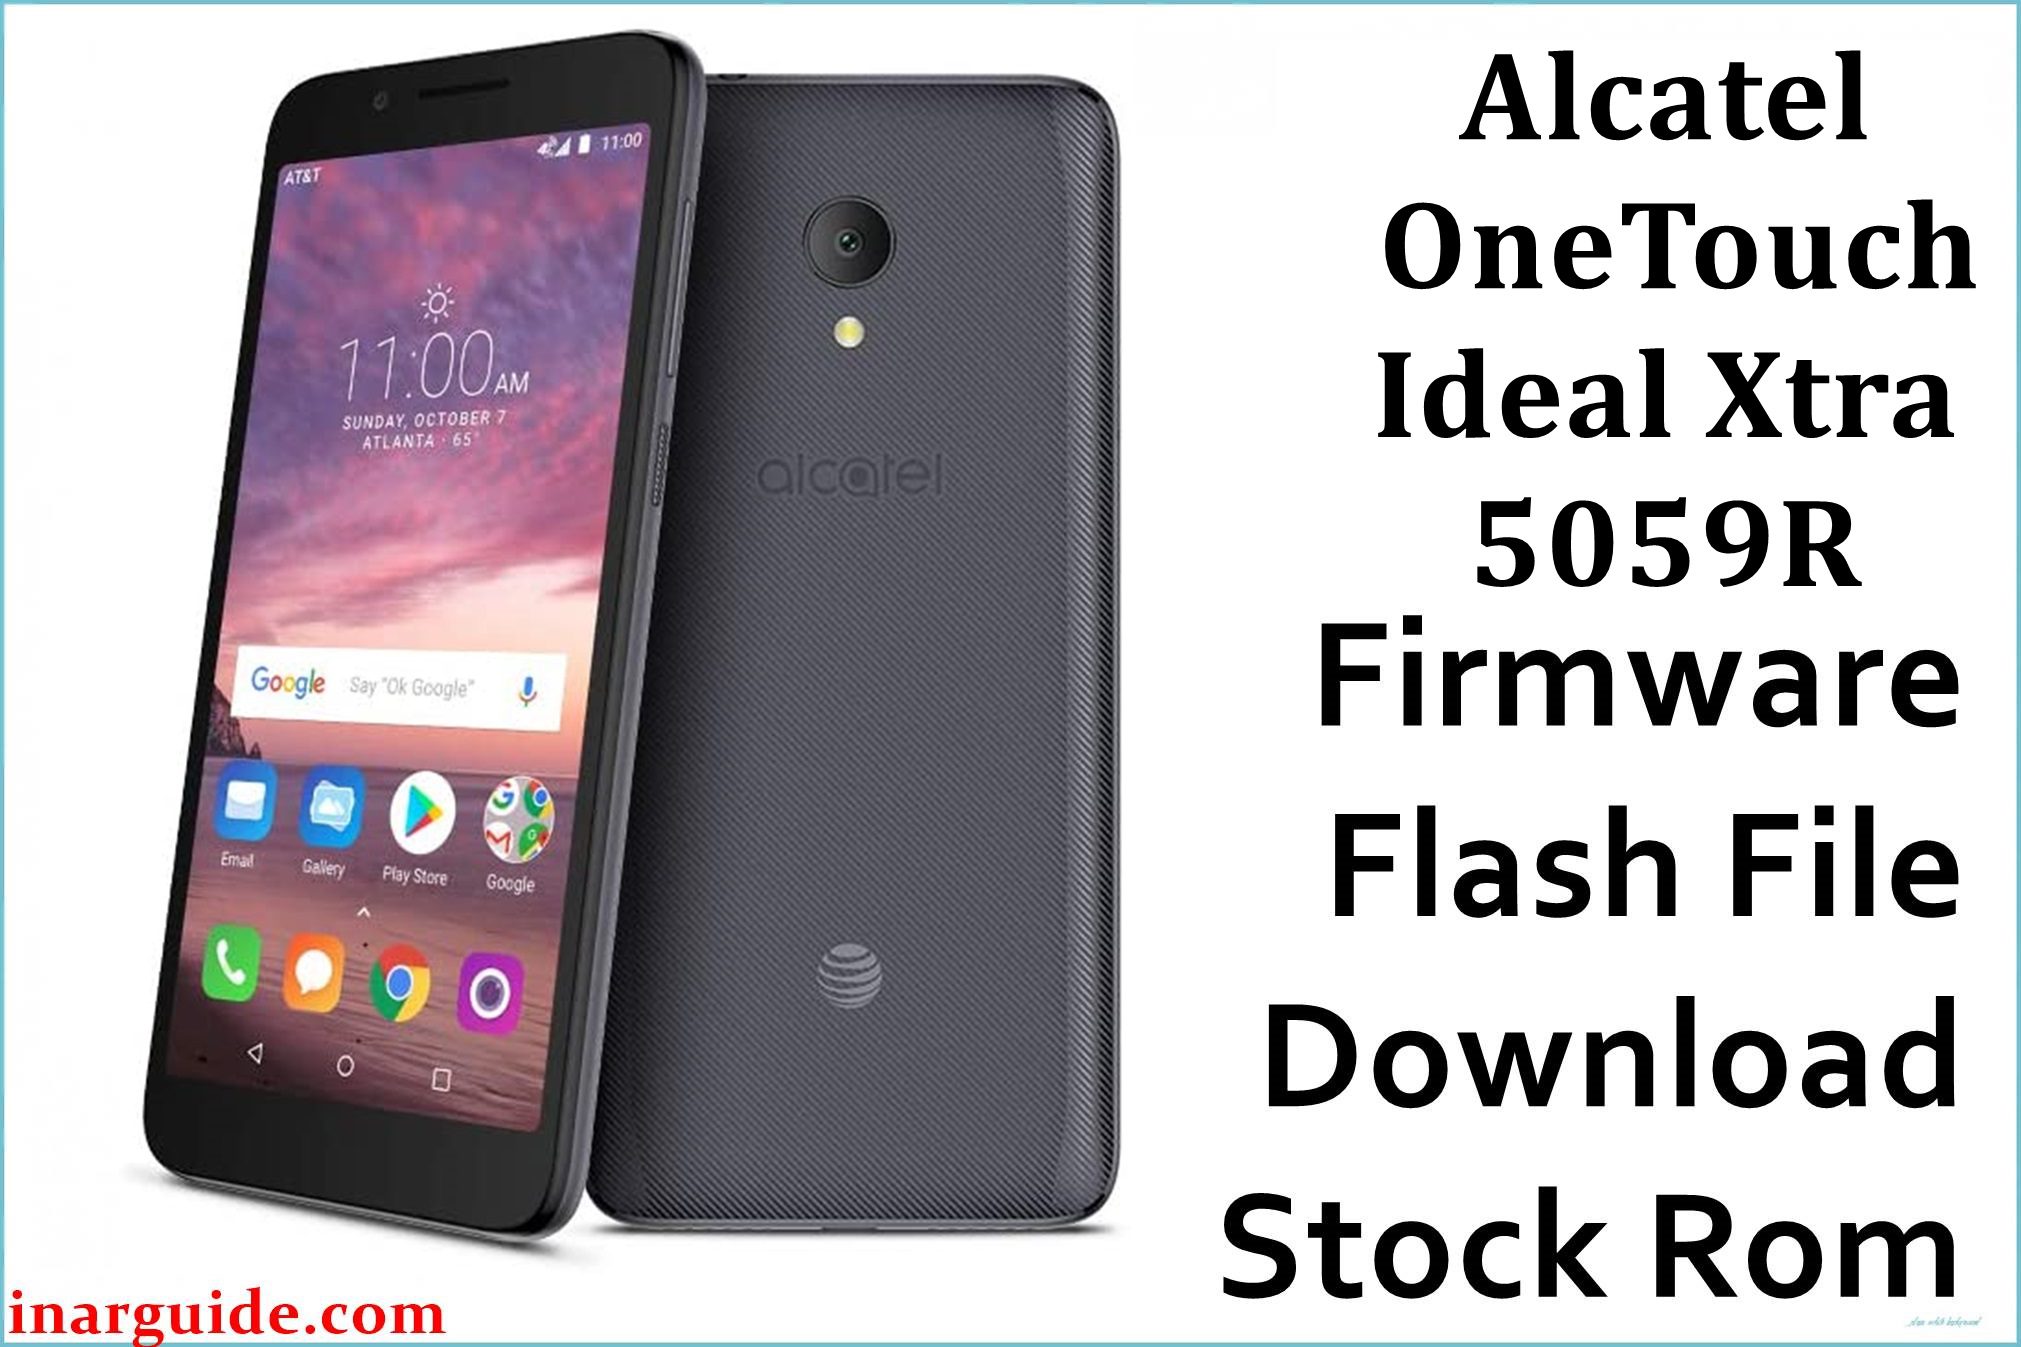 Alcatel OneTouch Ideal Xtra 5059R